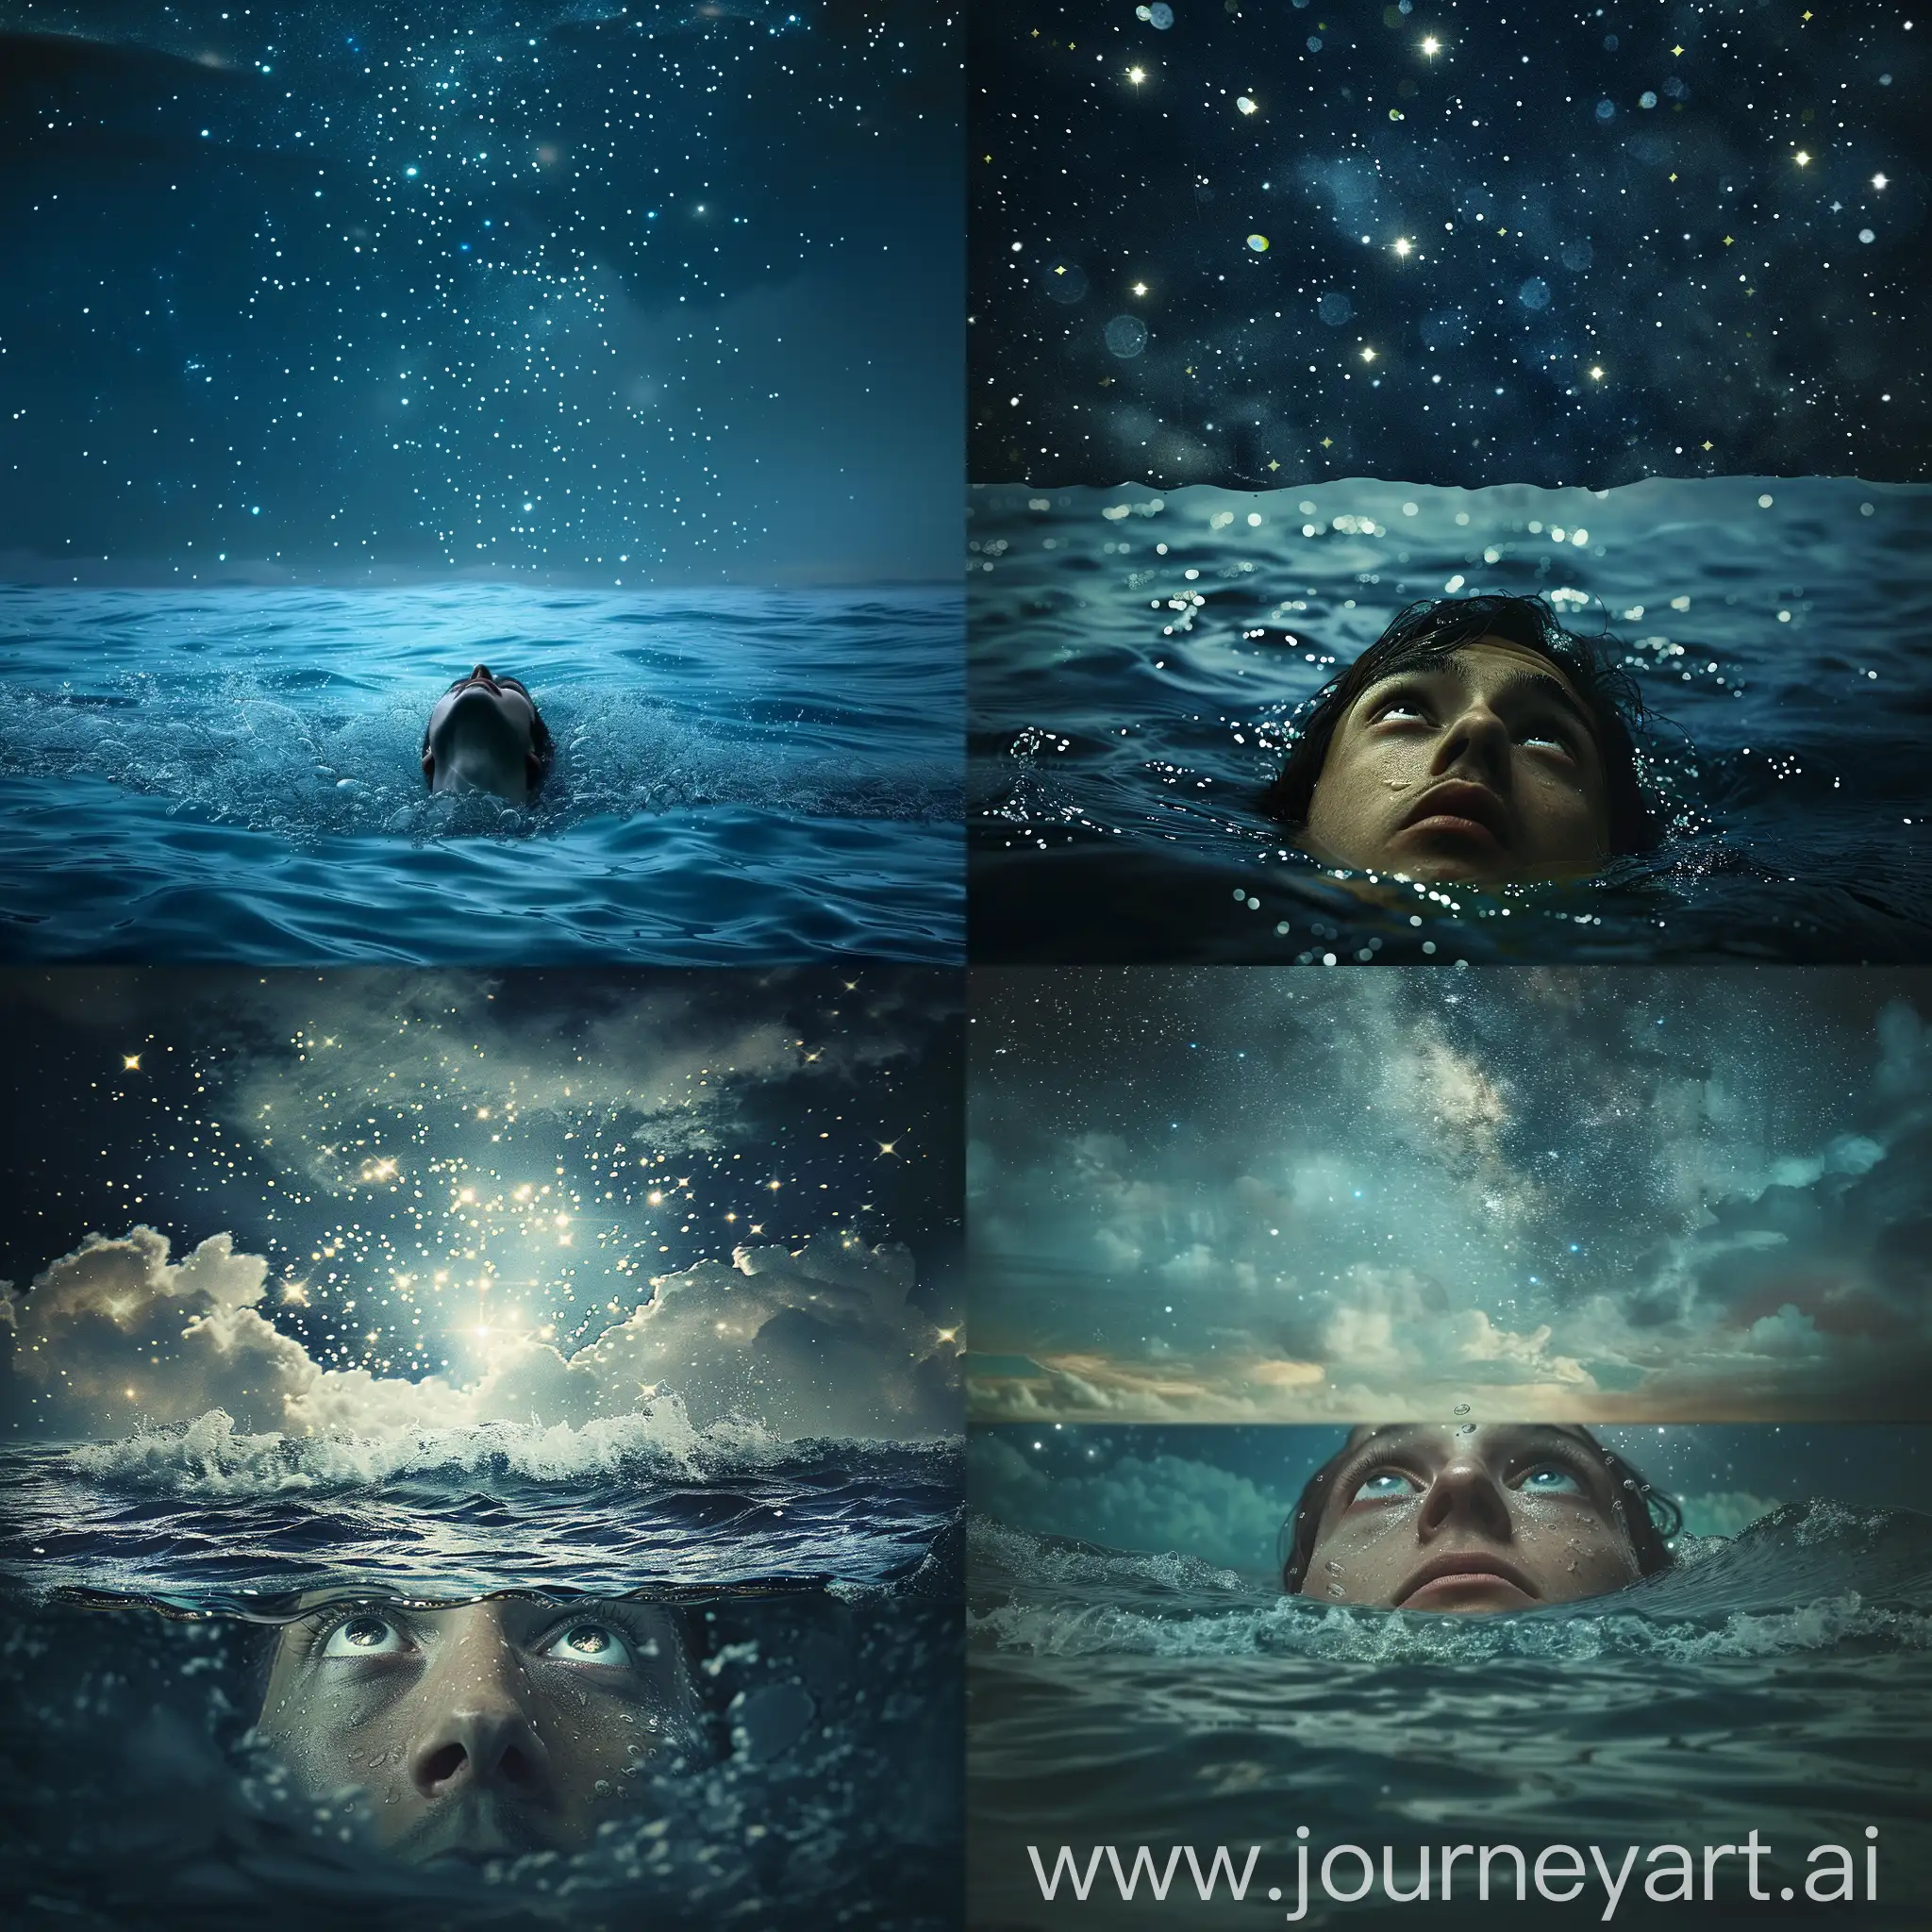 Person-Drowning-in-Ocean-Amidst-Starlit-Sky